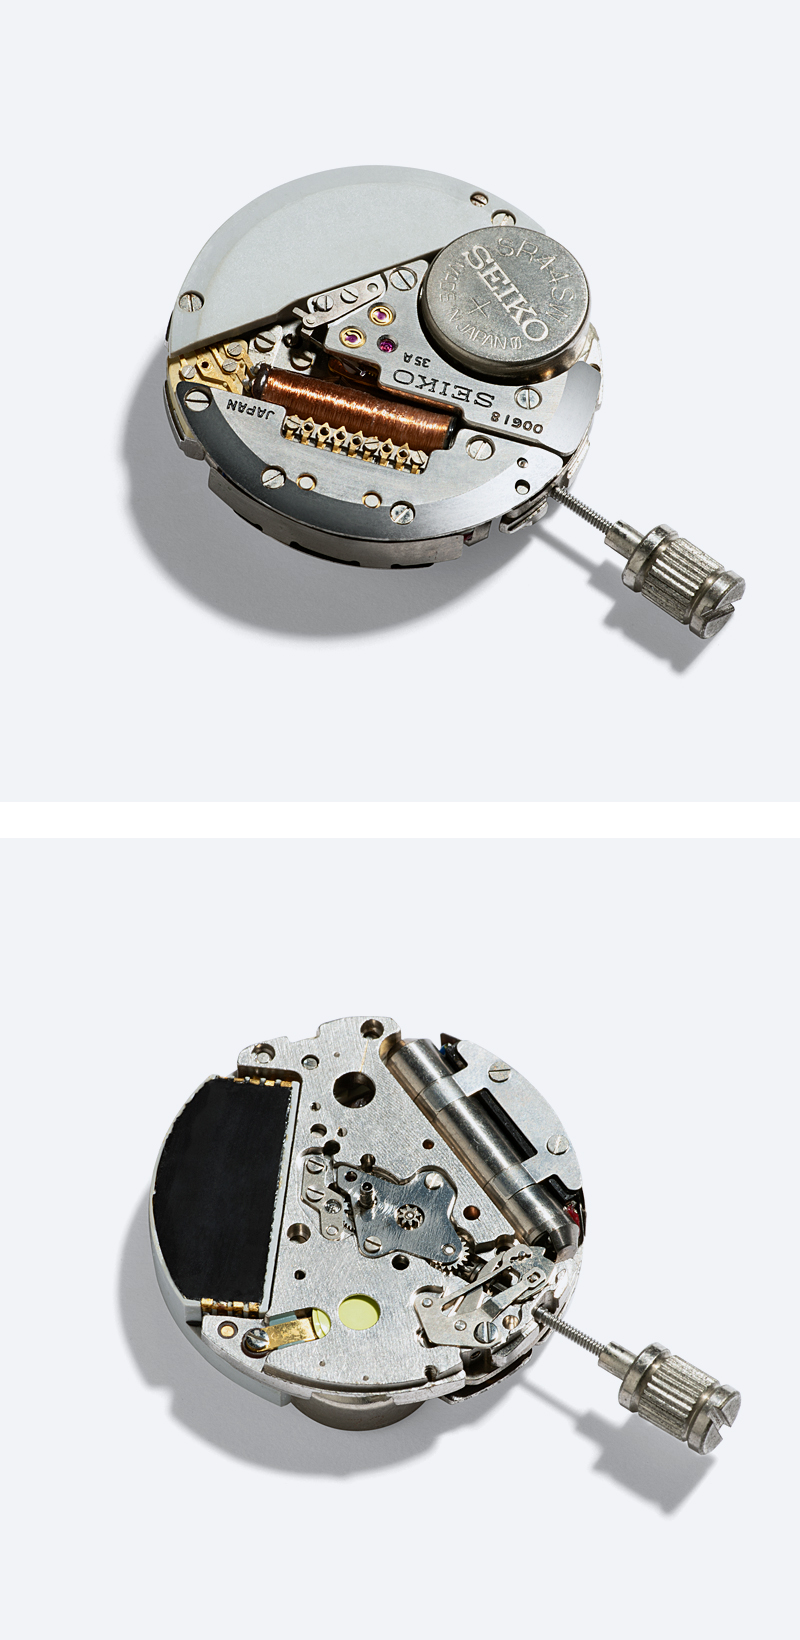 Photos of calibers (front and back) of quartz watches developed by Seiko